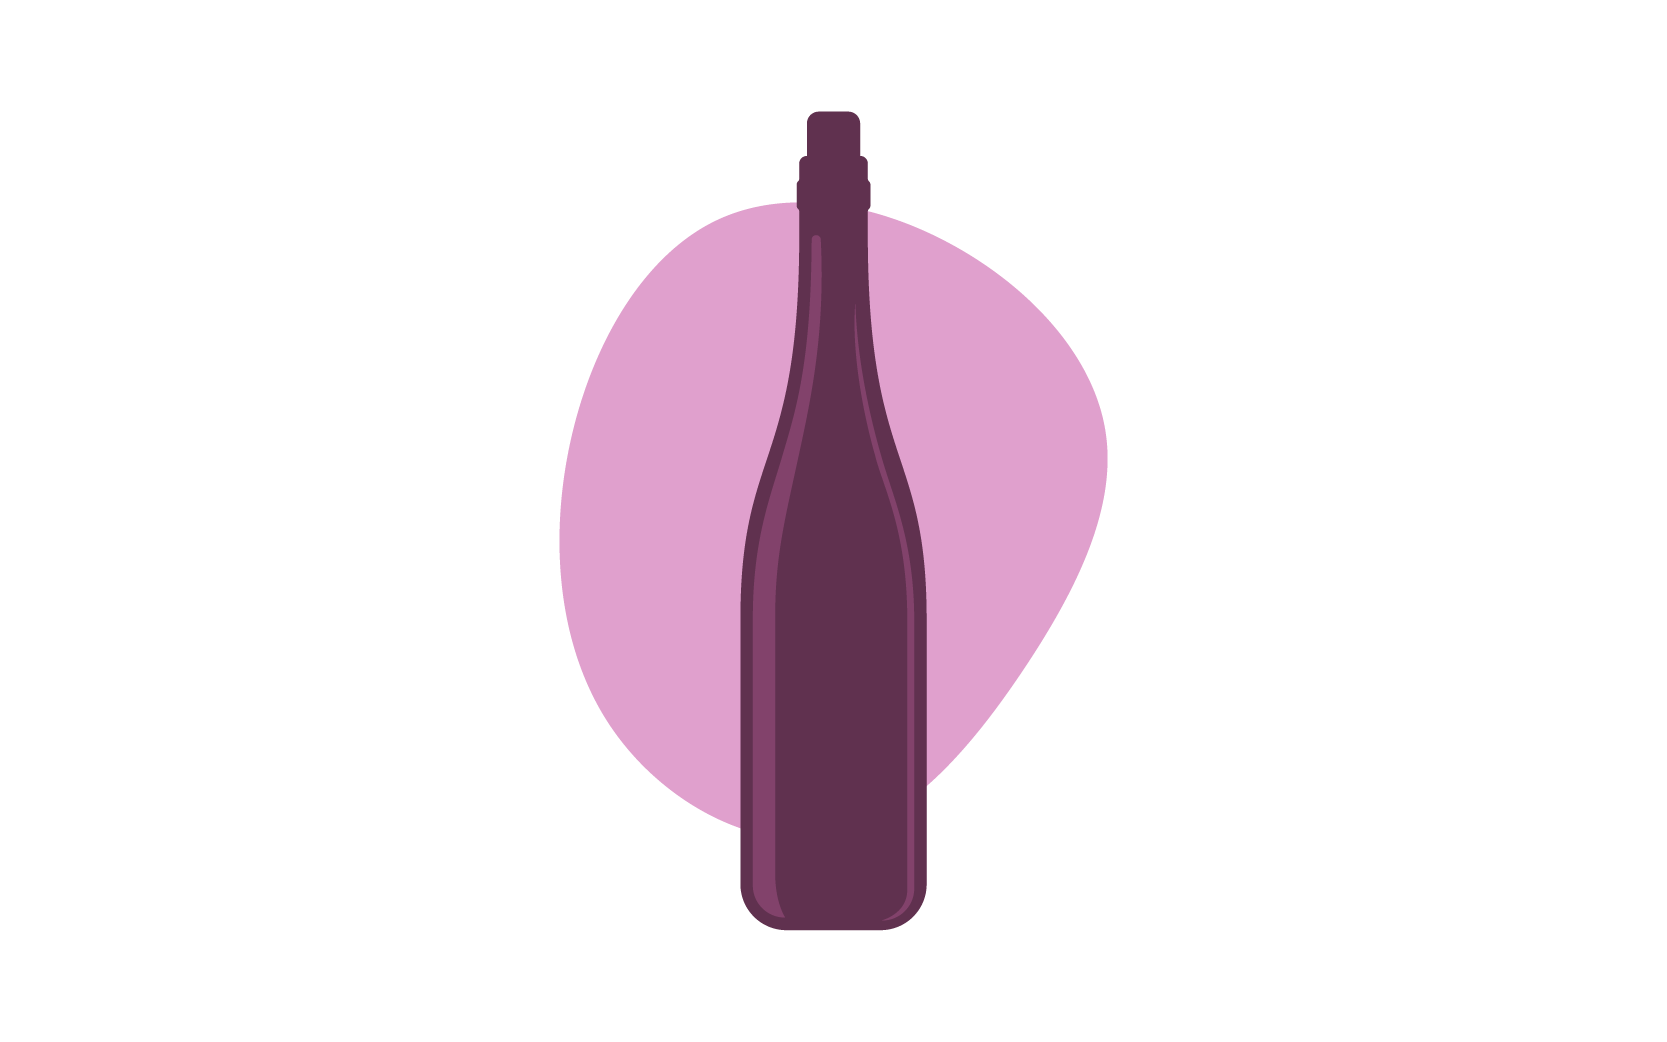 Wine Bottle Sizes, Shapes and Colors Guide